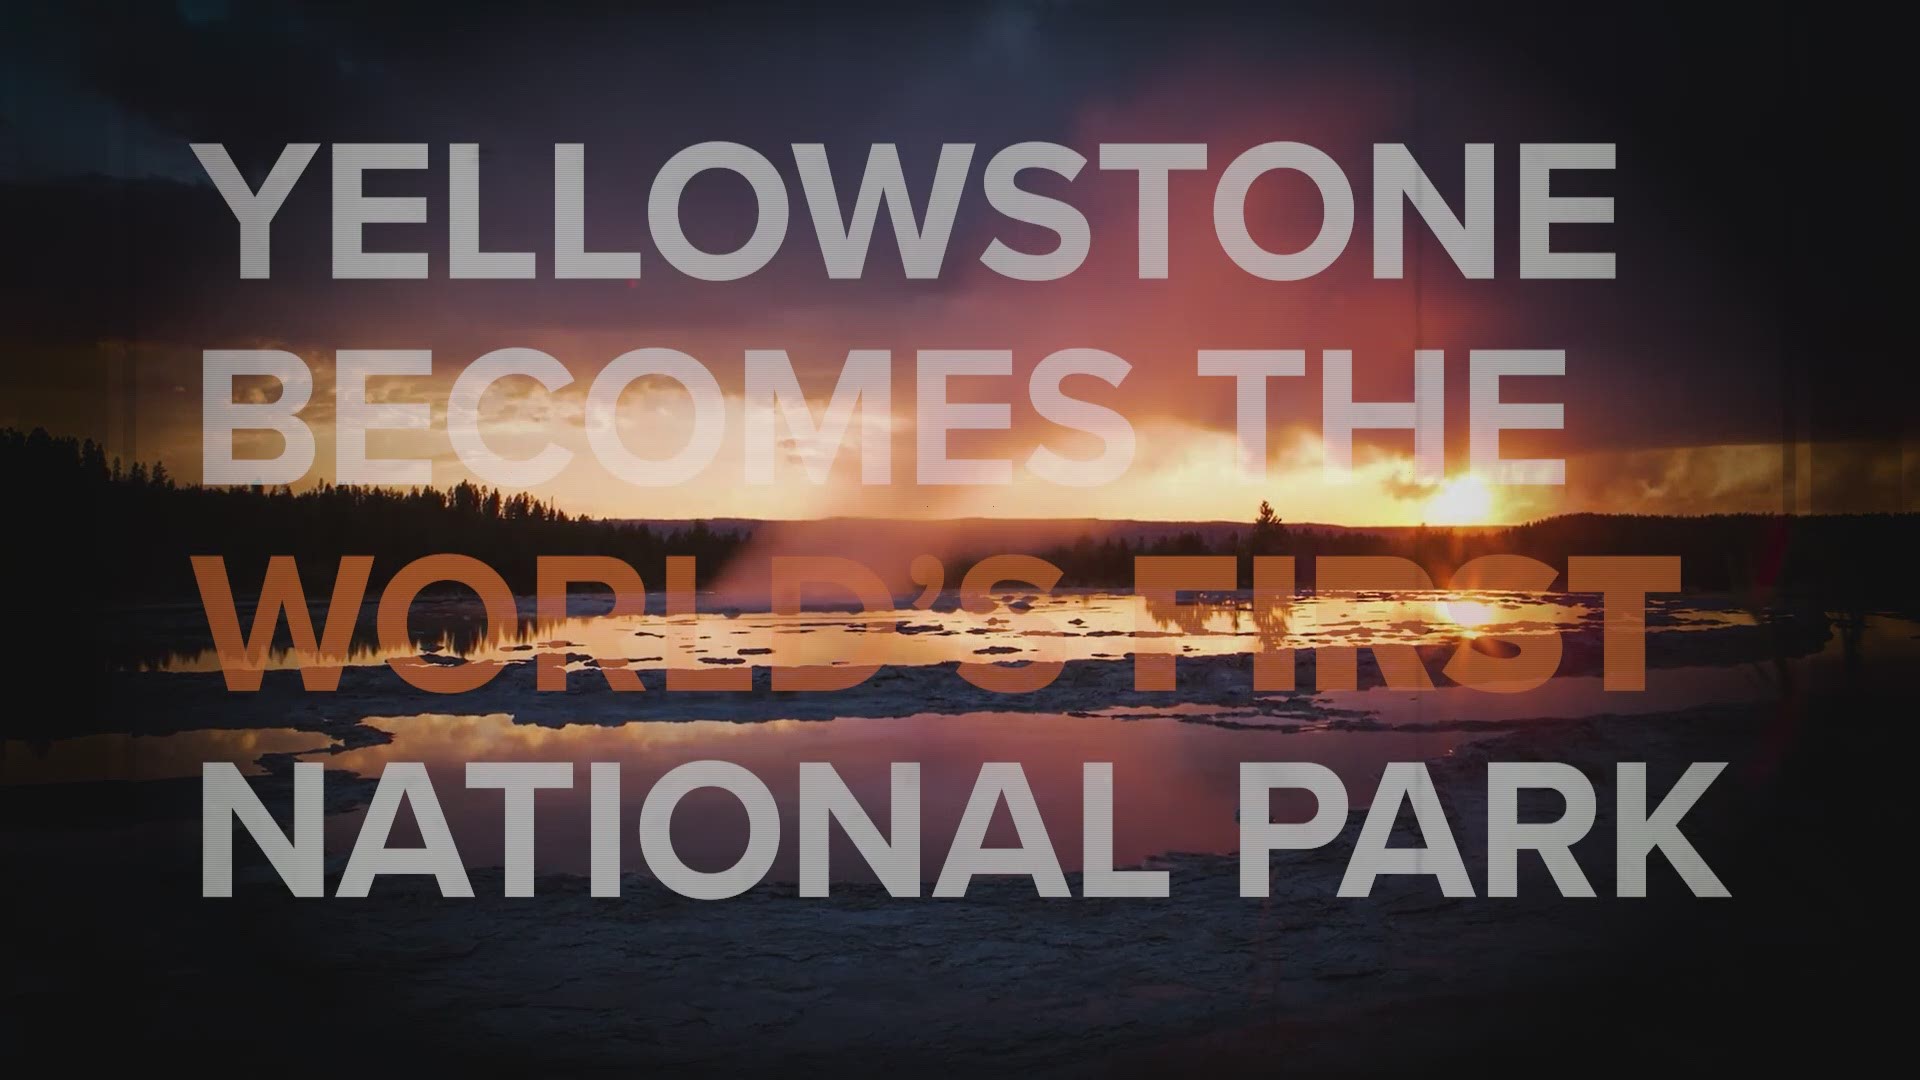 You likely know Yellowstone for the geyser known as Old Faithful, but there's a lot more to America's oldest national park.